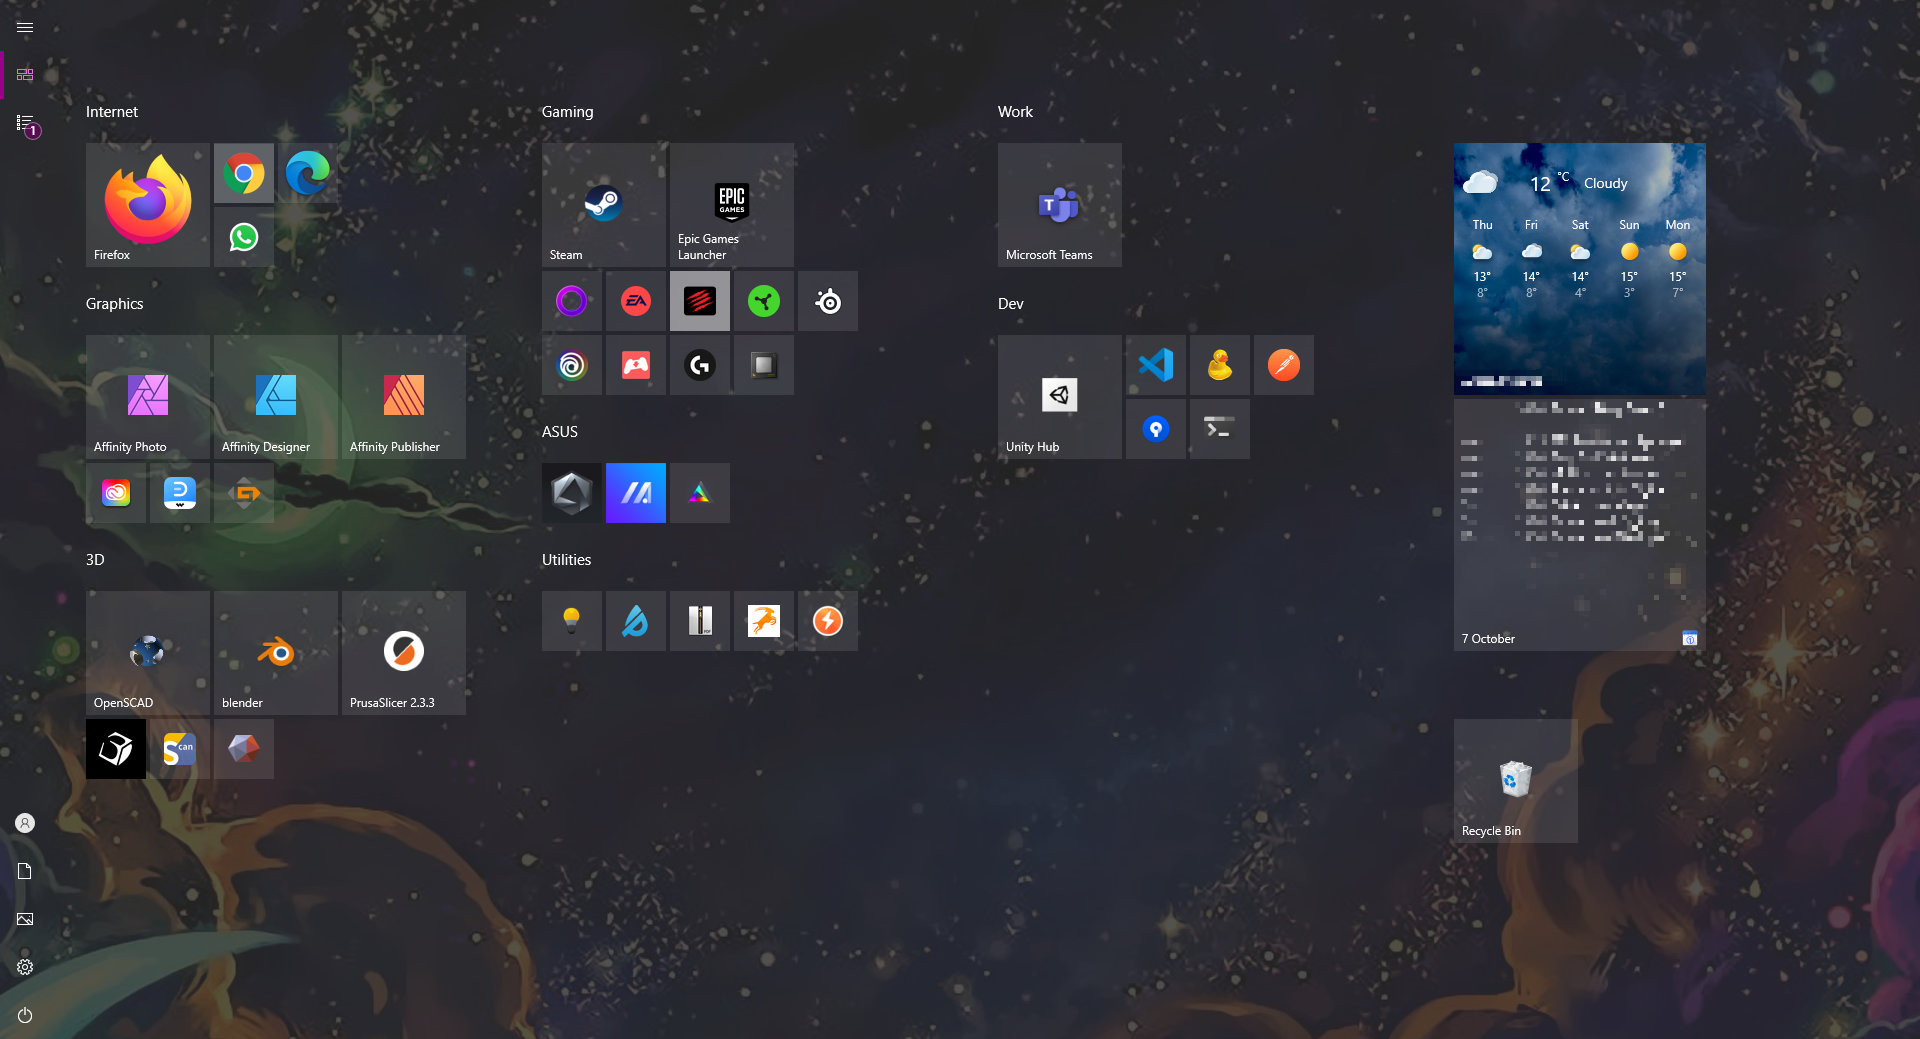 full-screen start menu with lots of spatially arranged applications